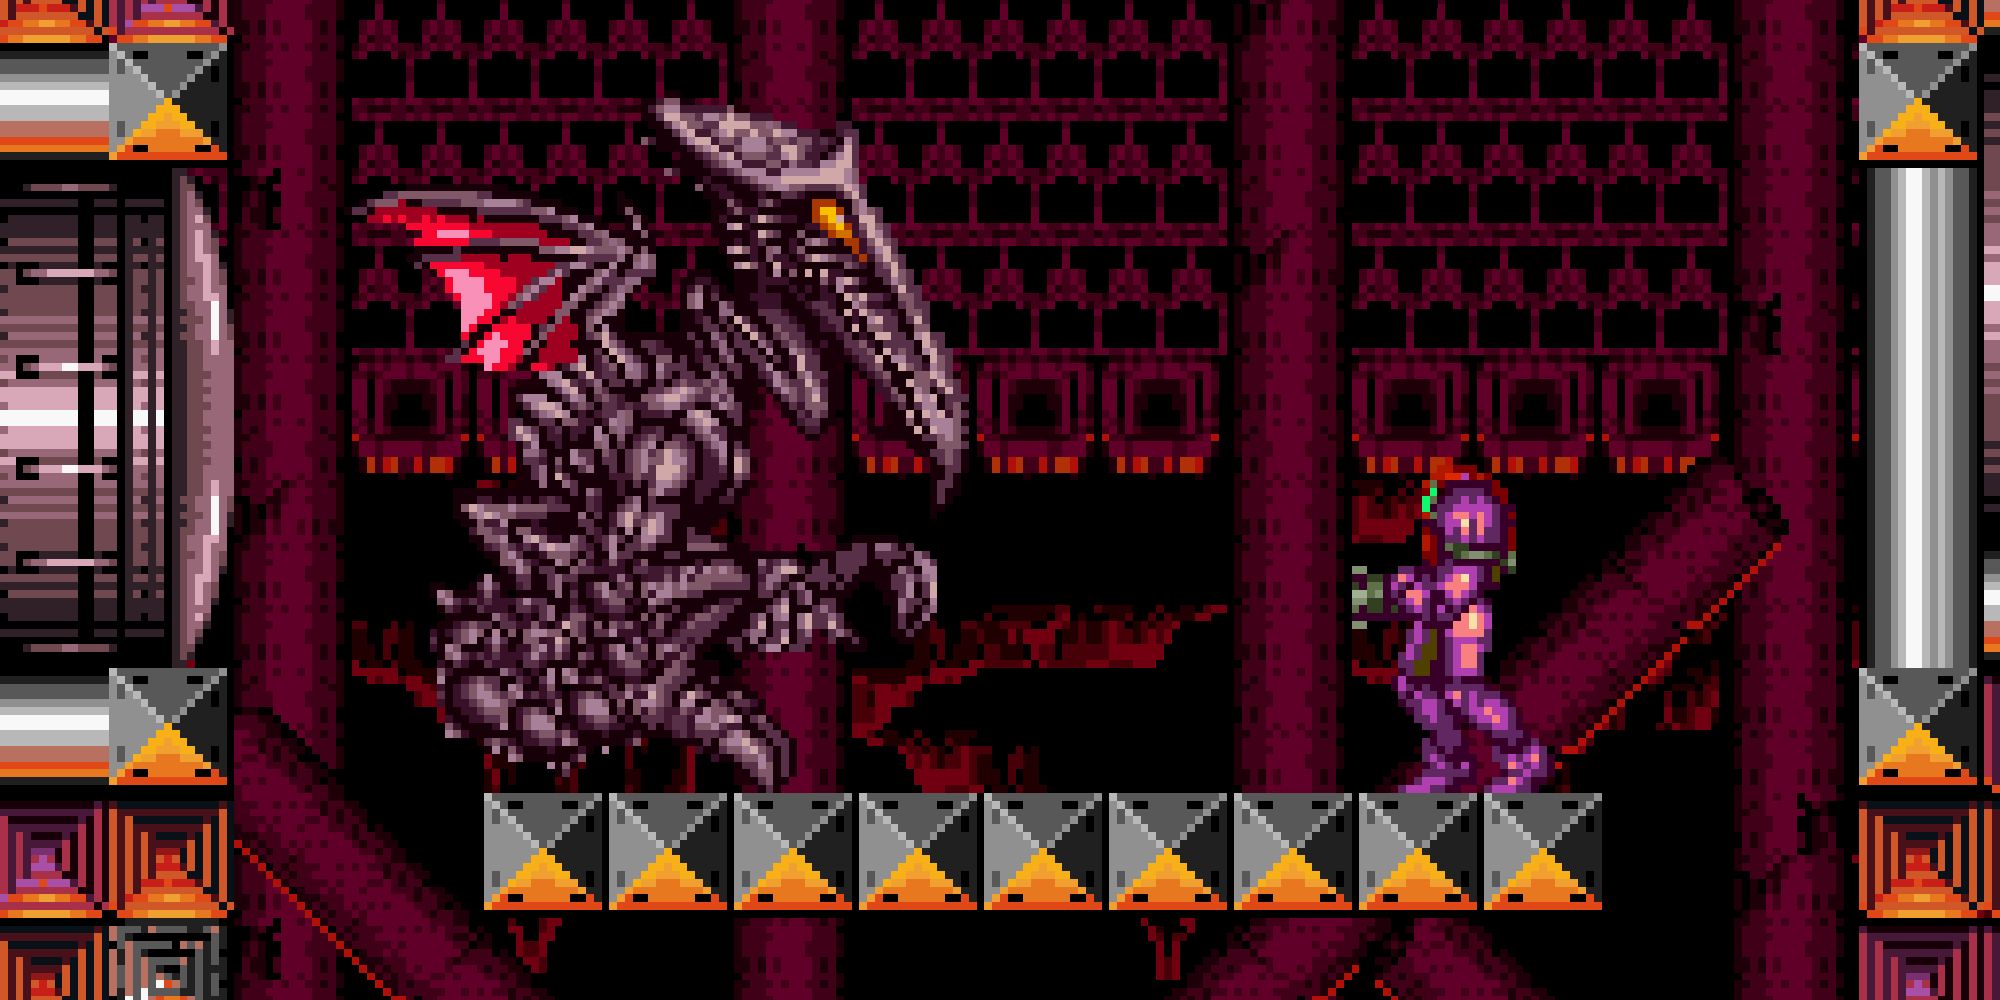 Samus in a purple suit facing off against Ridley in his lair in Super Metroid